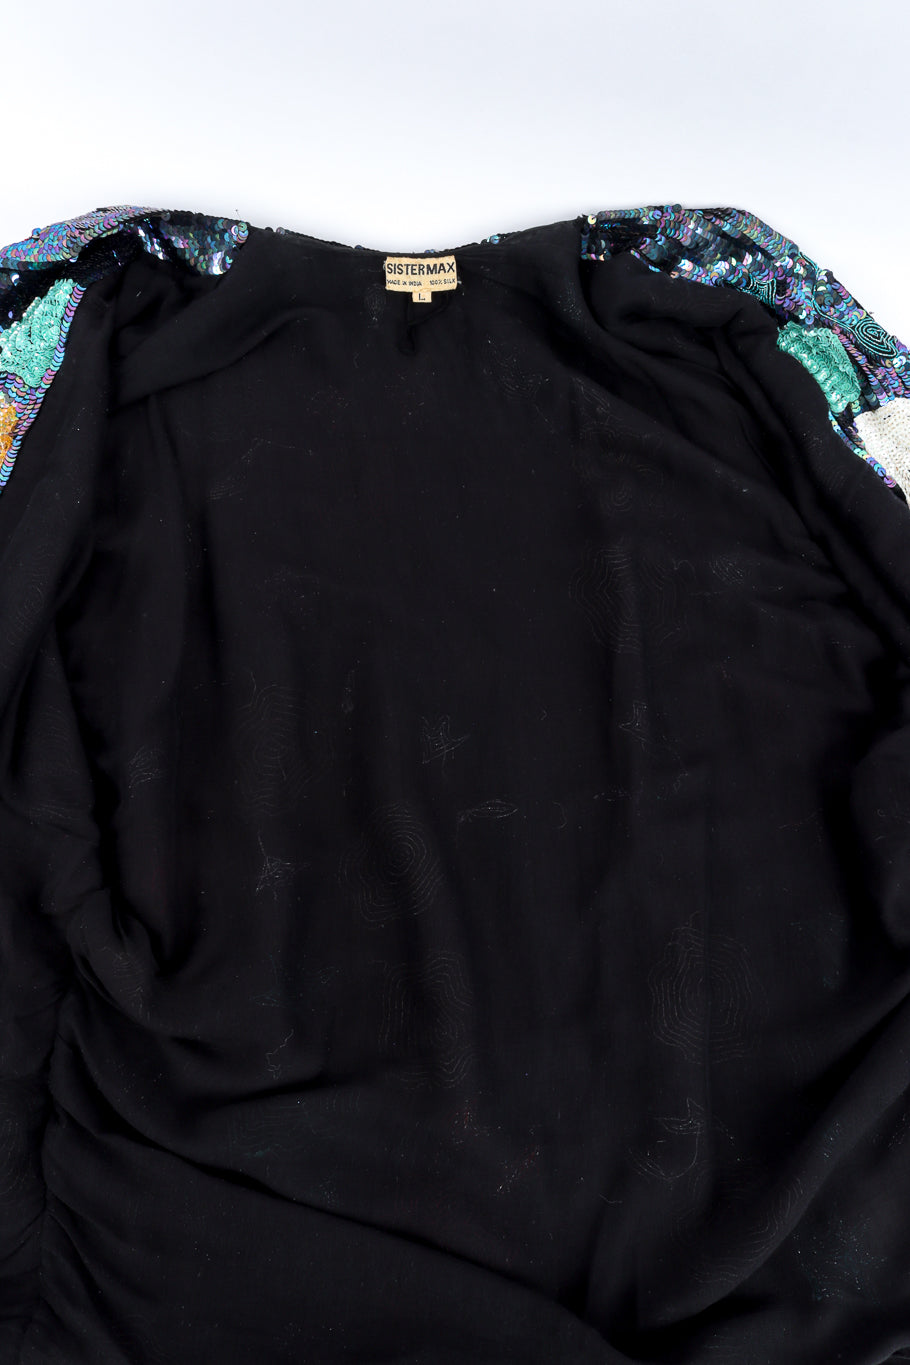 Vintage Sister Max Sequin Flower Duster view of lining @recess la